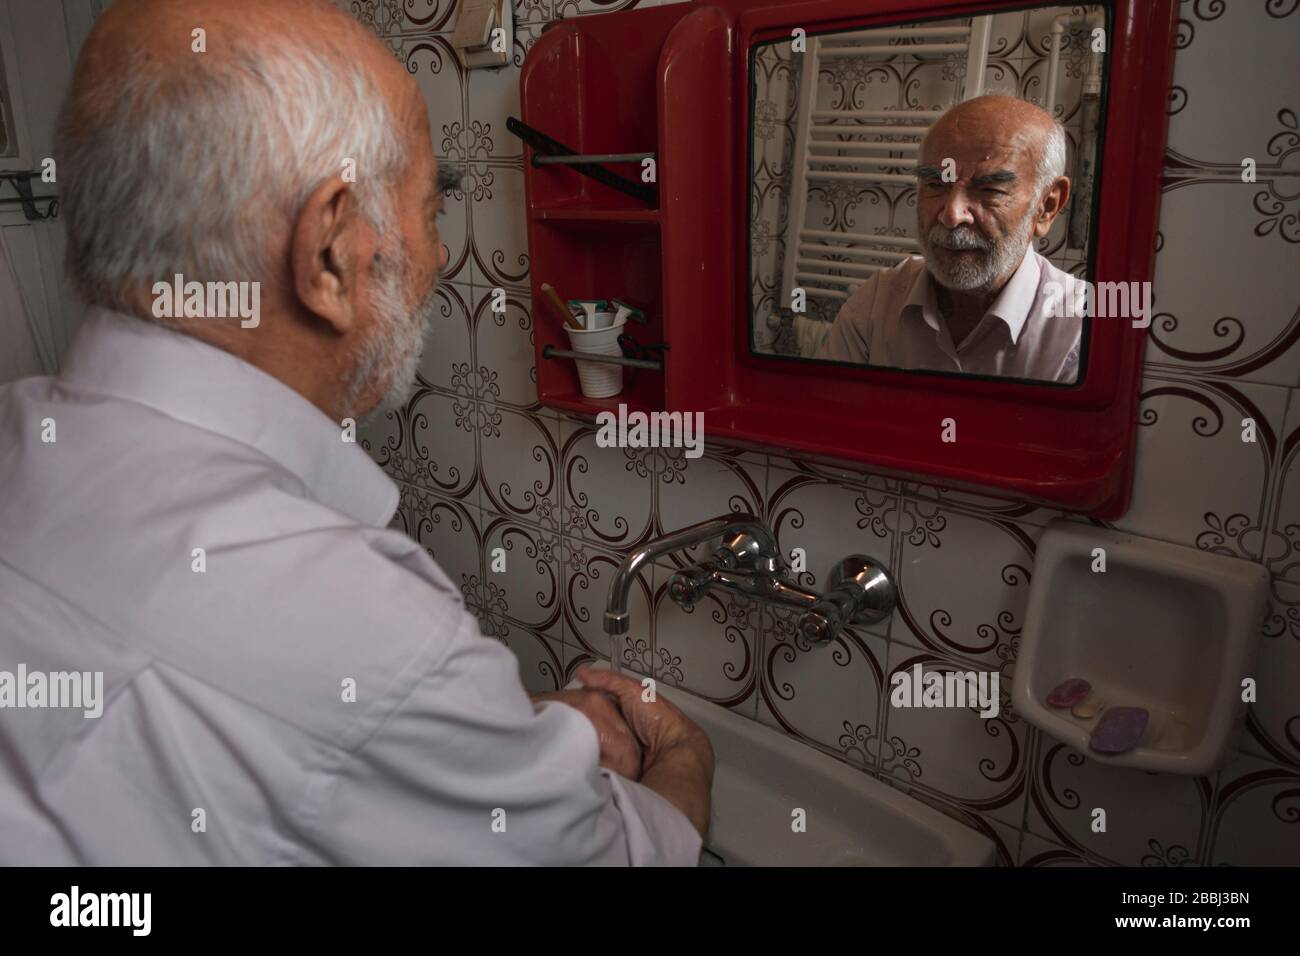 80 years old Turkish man looking to mirror in his vintage bathroom while washing his hands Stock Photo